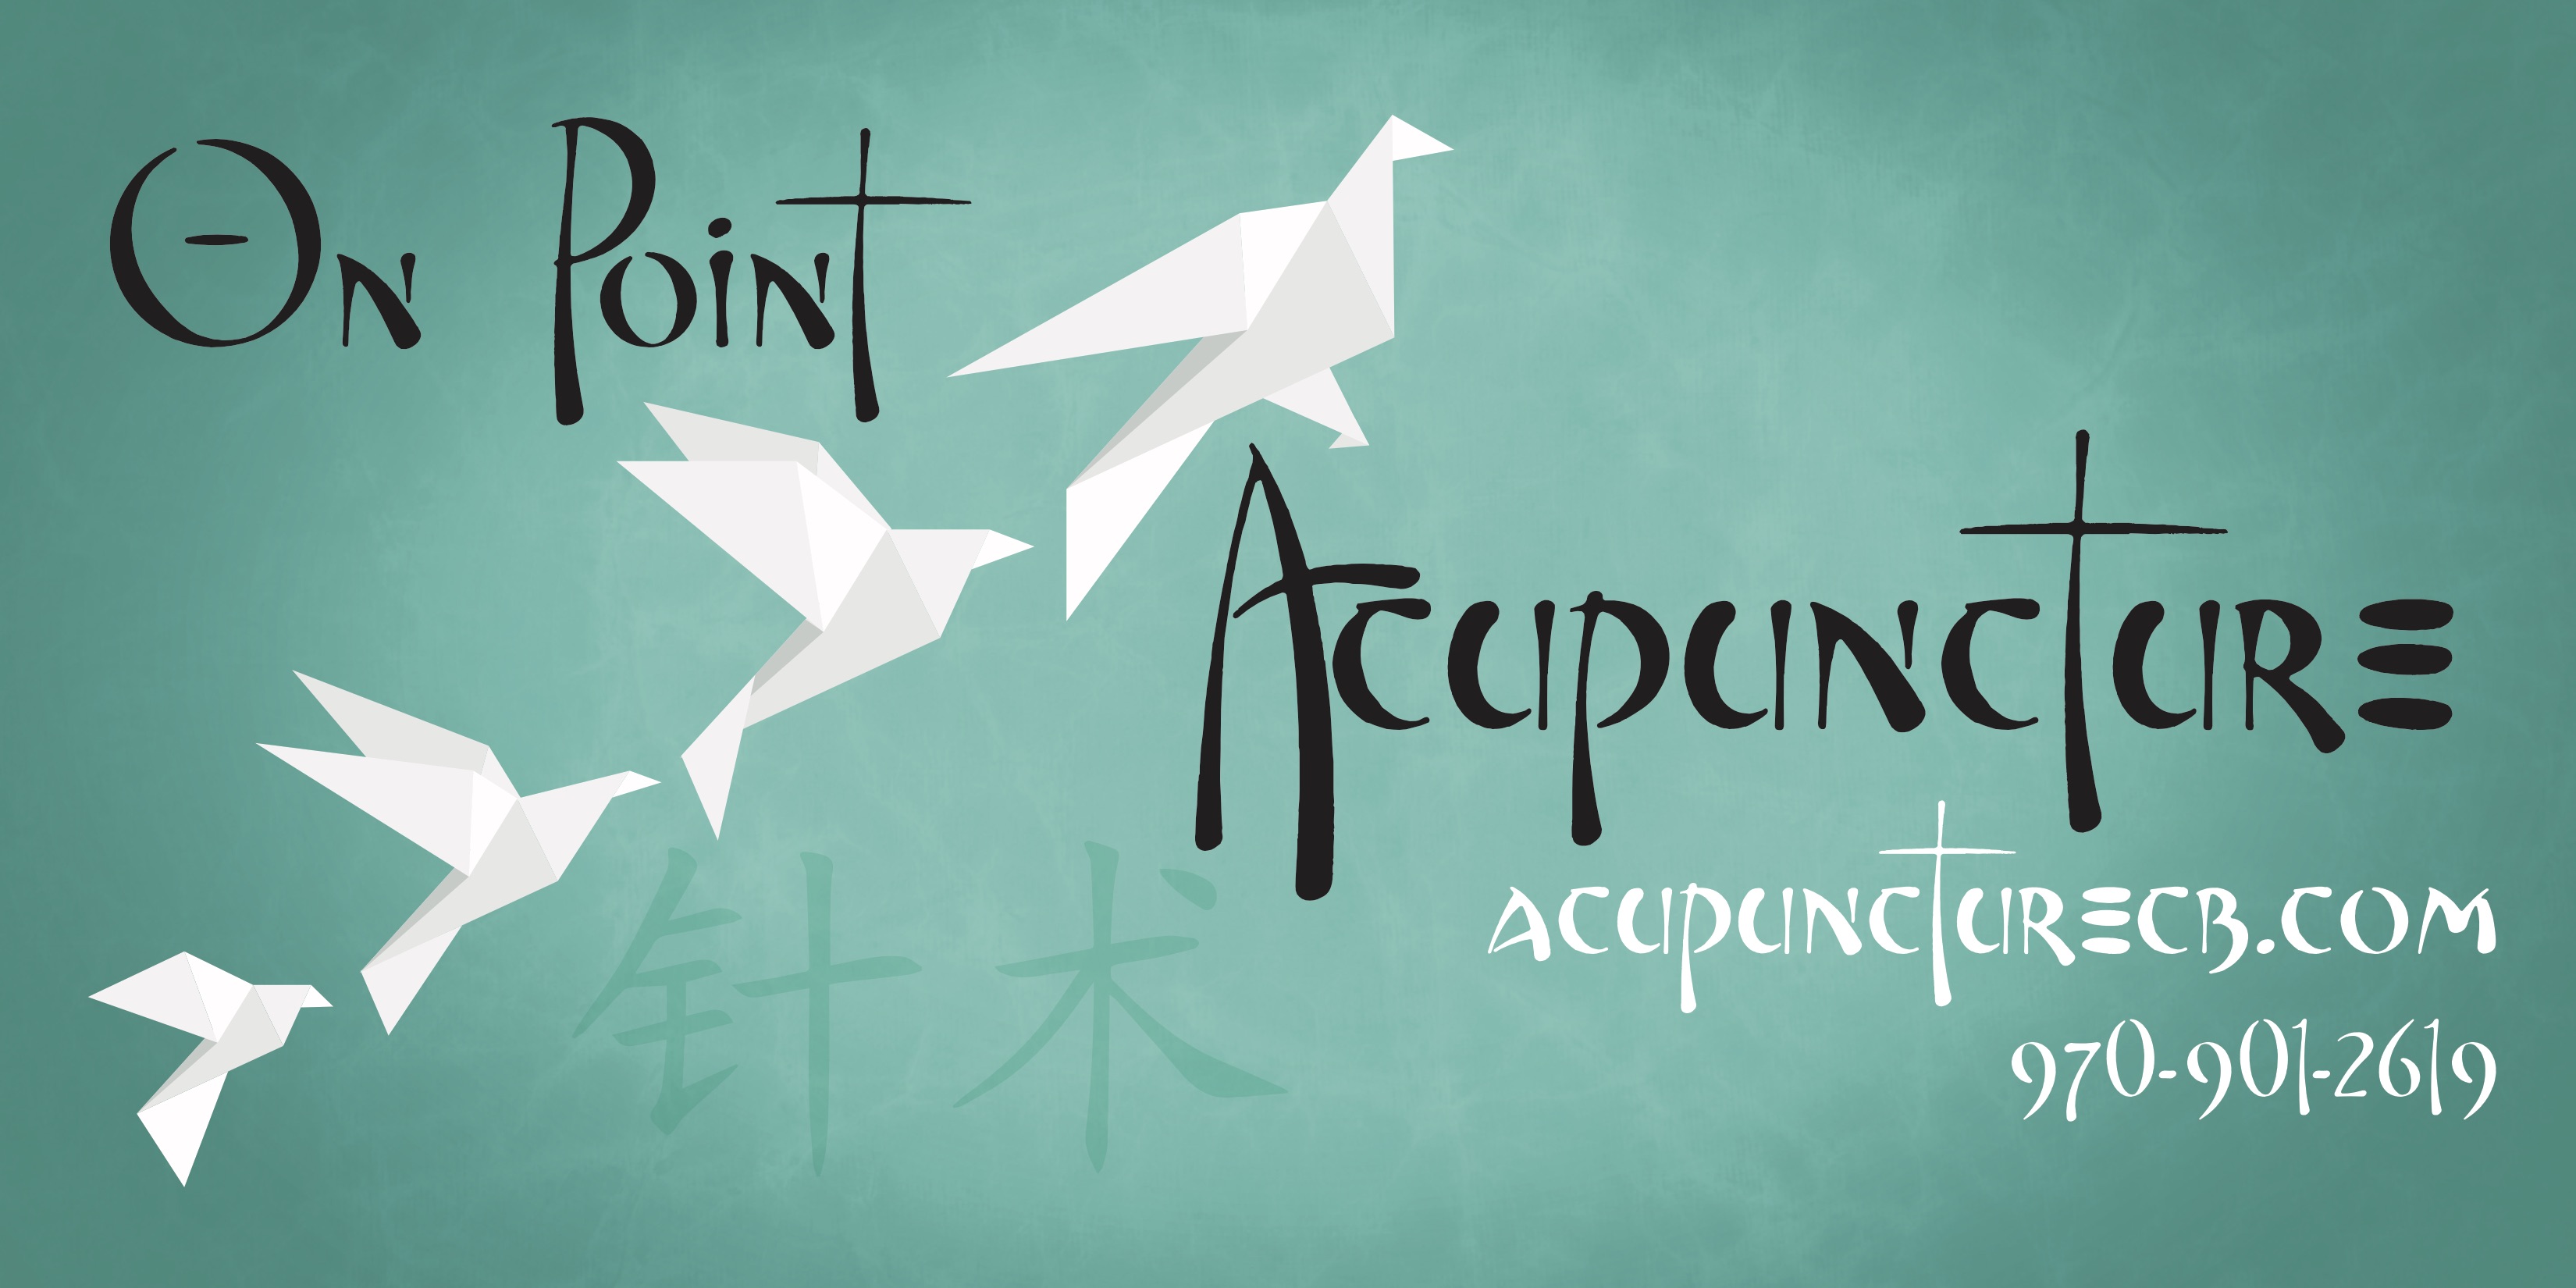 on point acupuncture - Amy Wais